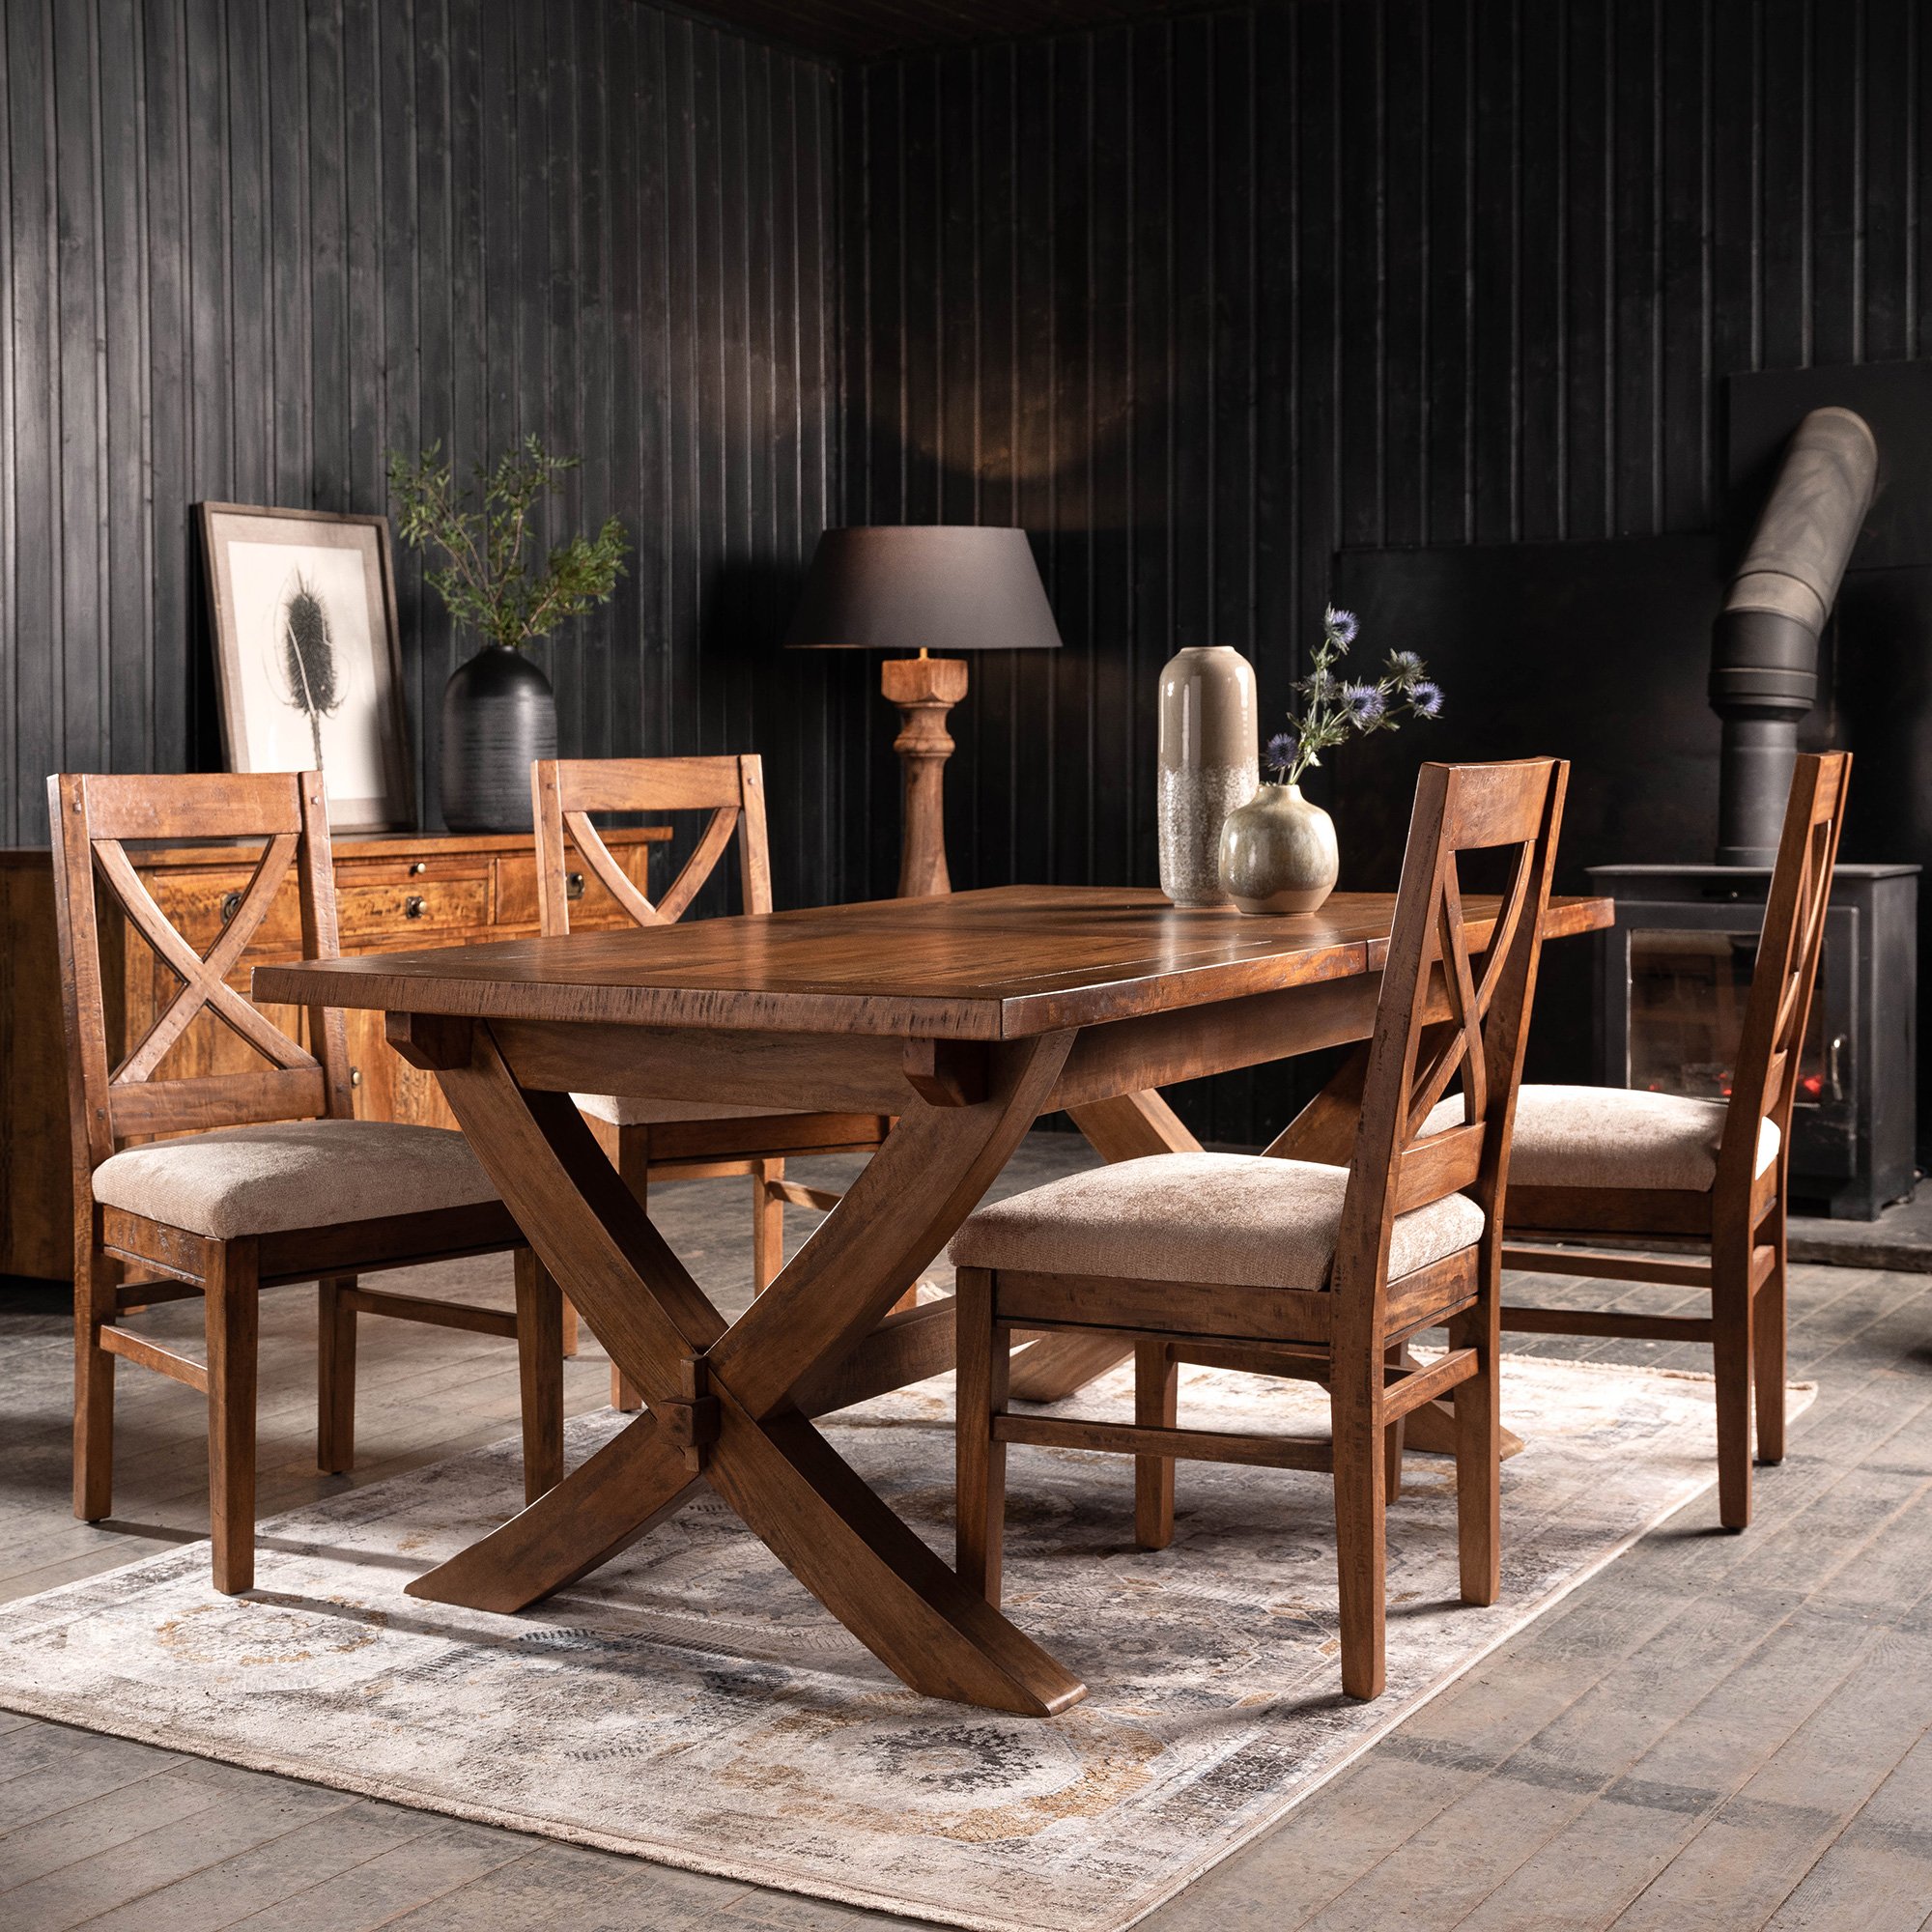 New Frontier Extending Dining Table & 4 Chairs, Mango Wood | Barker & Stonehouse